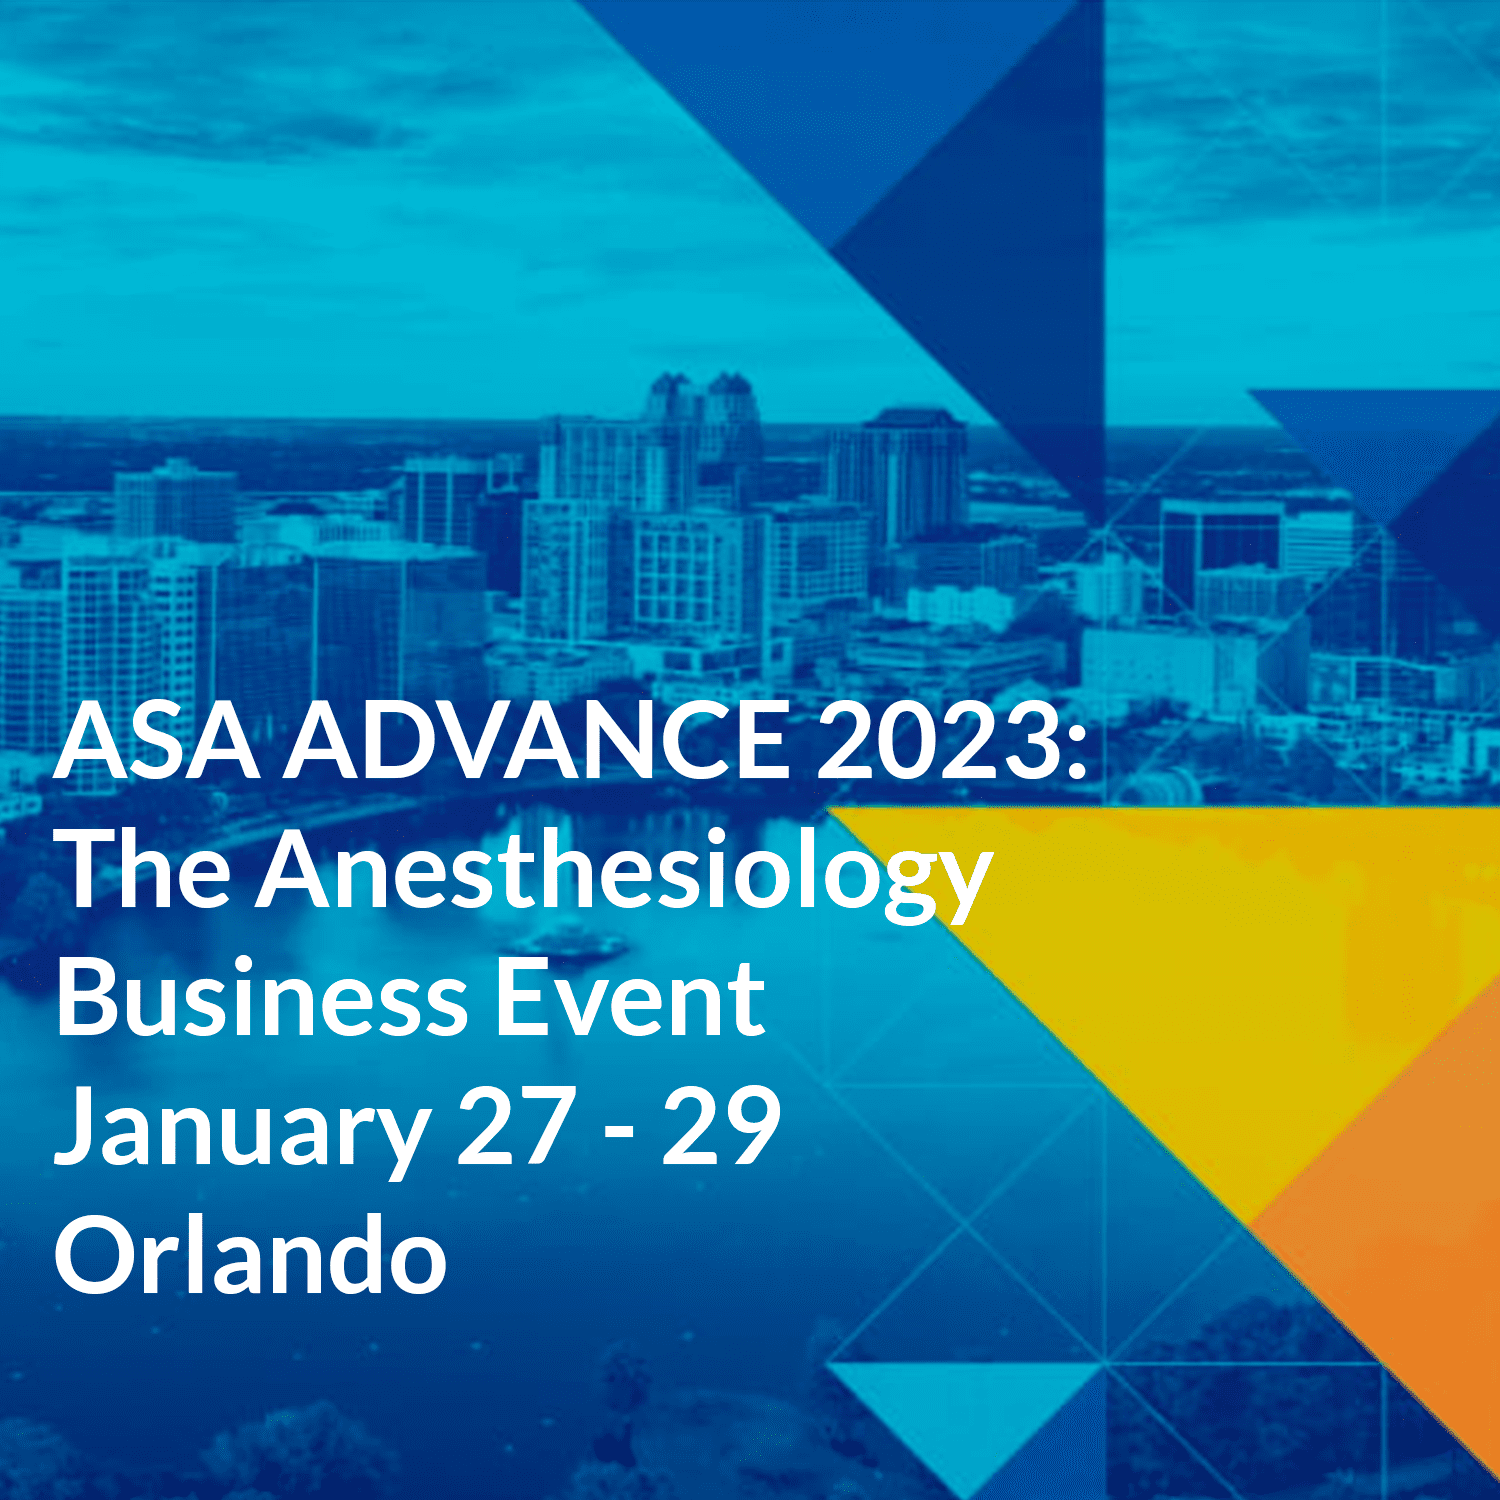 ASA ADVANCE 2023: The Anesthesiology Business Event